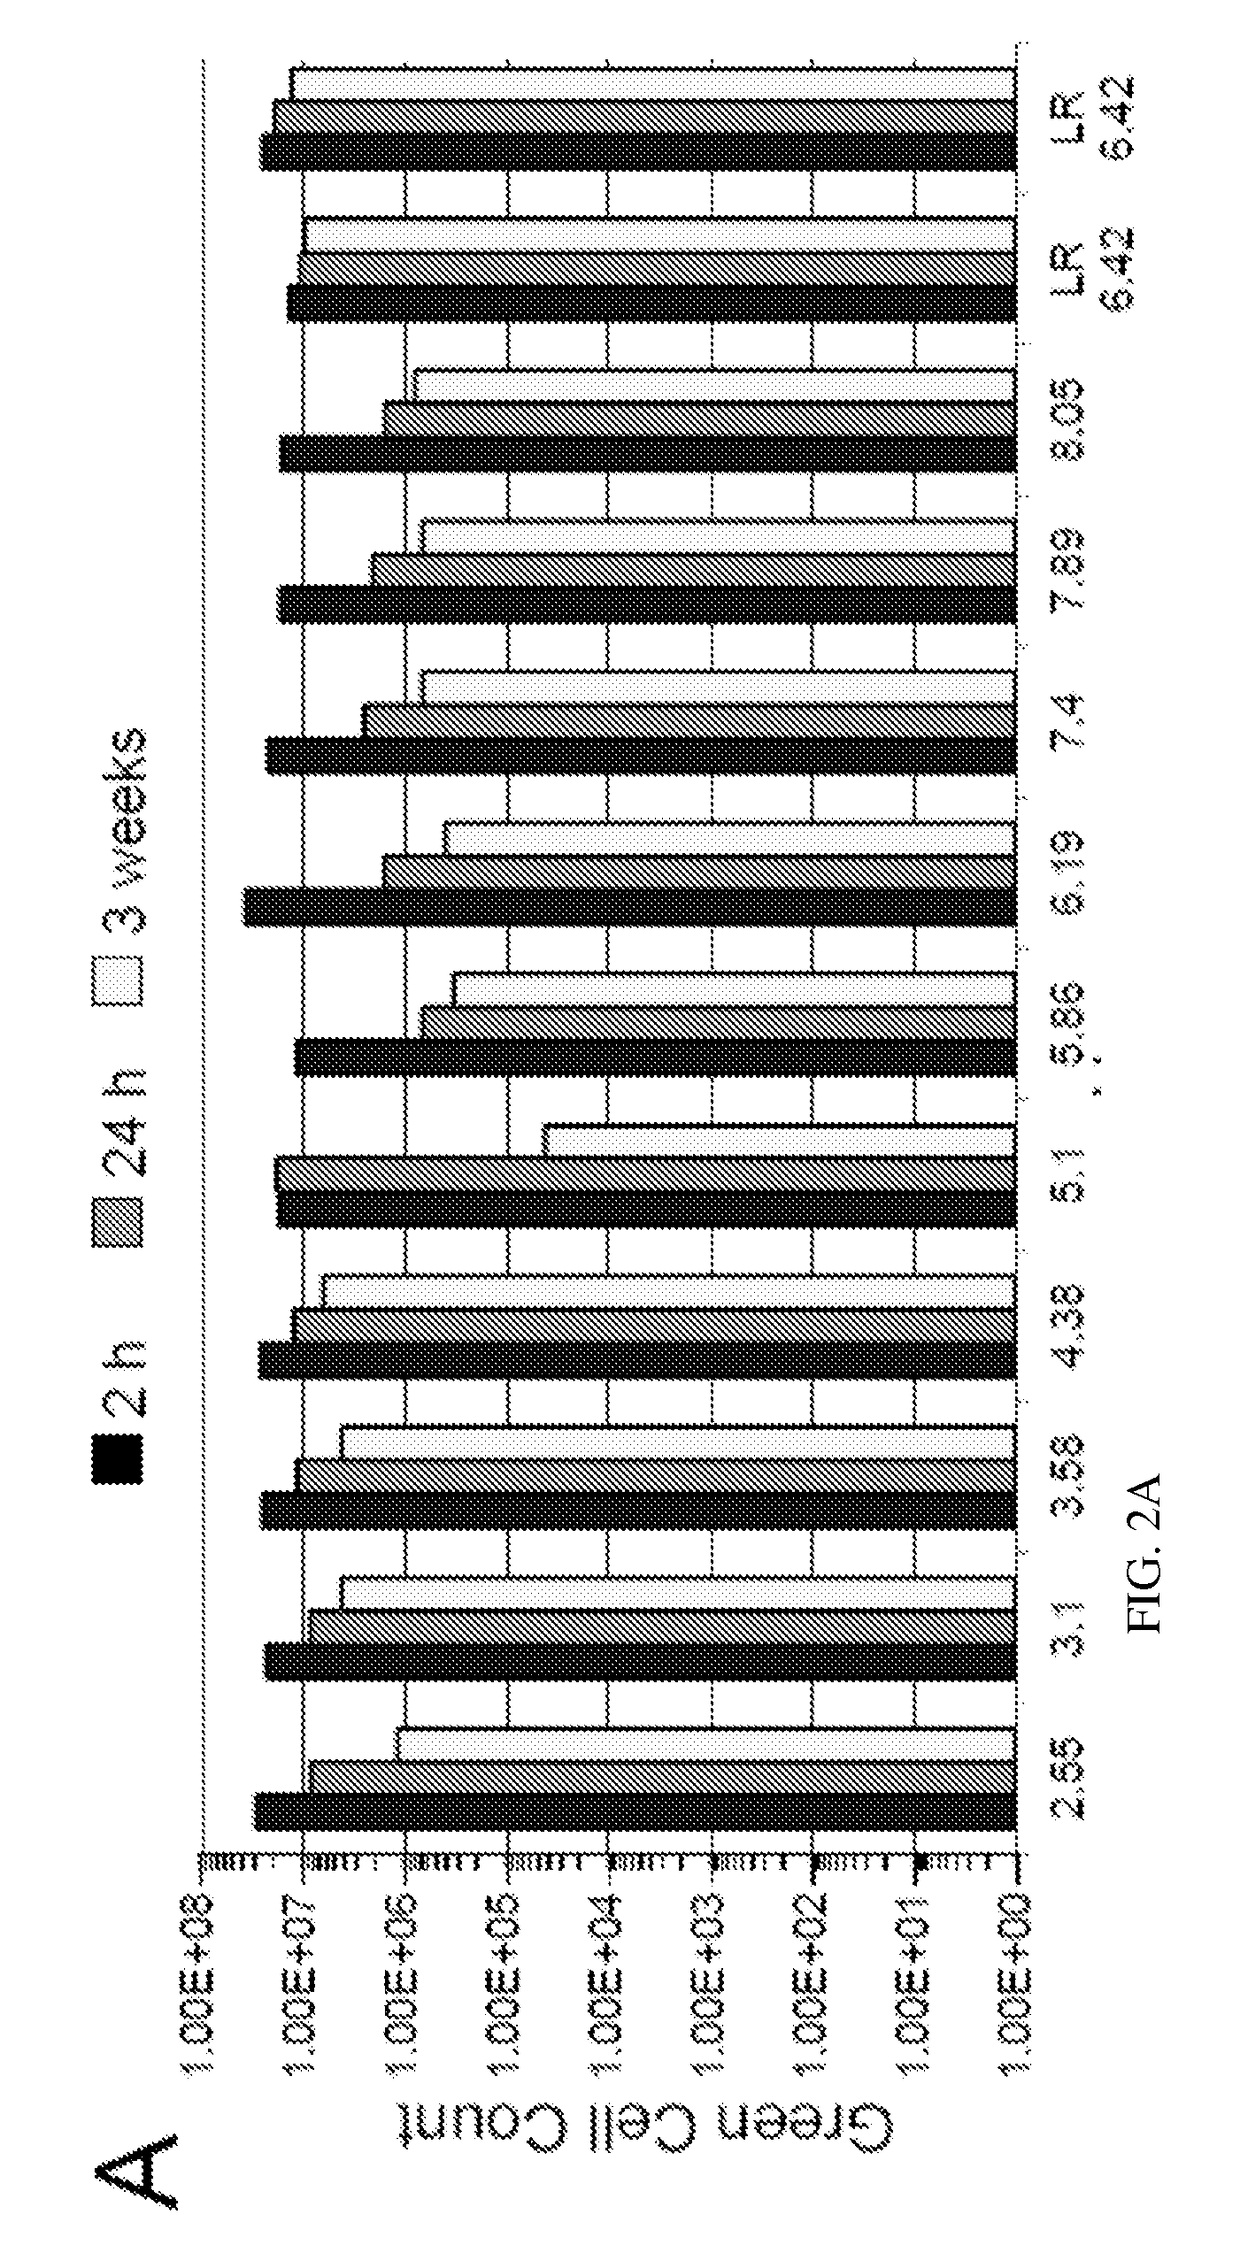 Compositions and methods for purifying recombinant adeno-associated virus